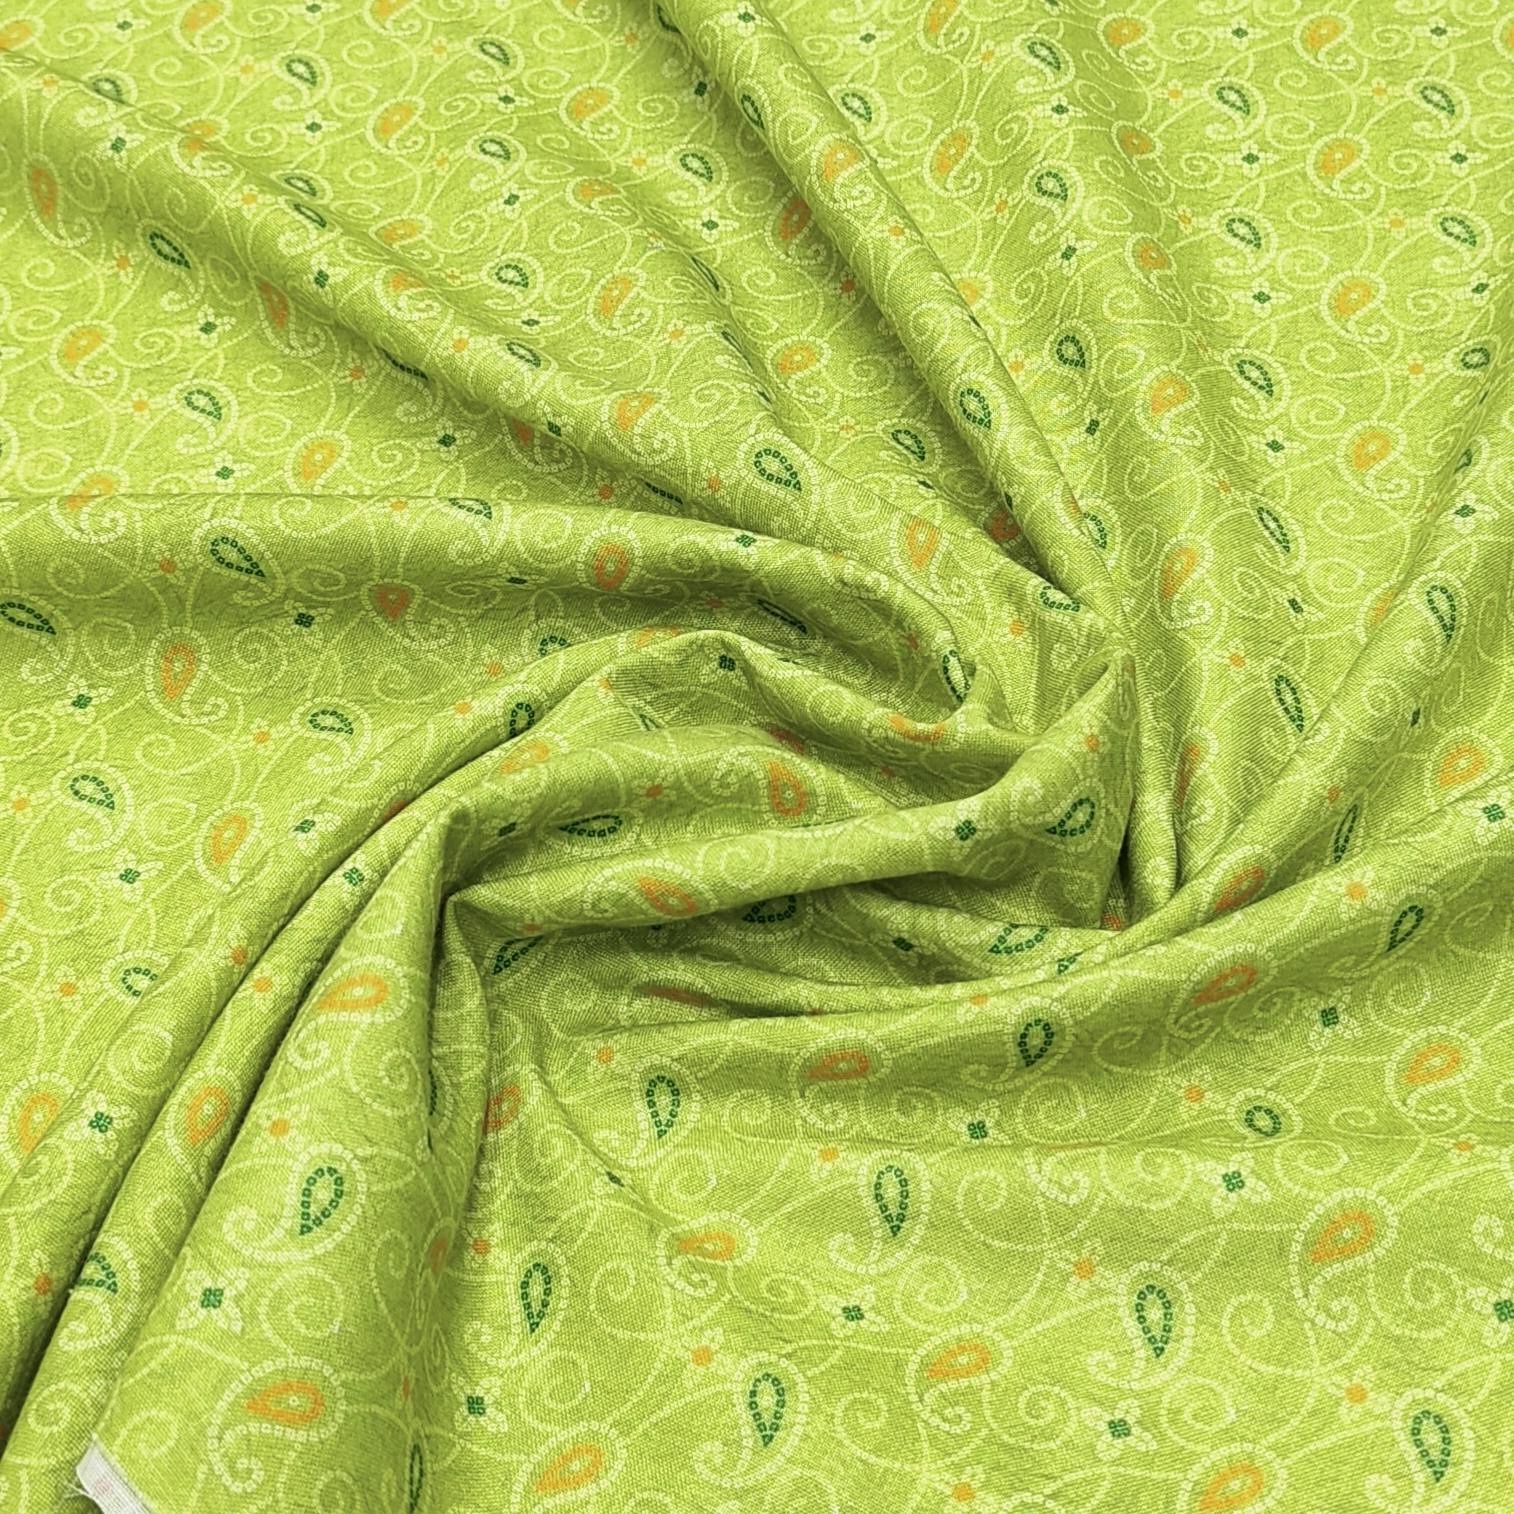 Mantire Special Wrinkle Free Digital Printed Shirt Fabric Colour mint green